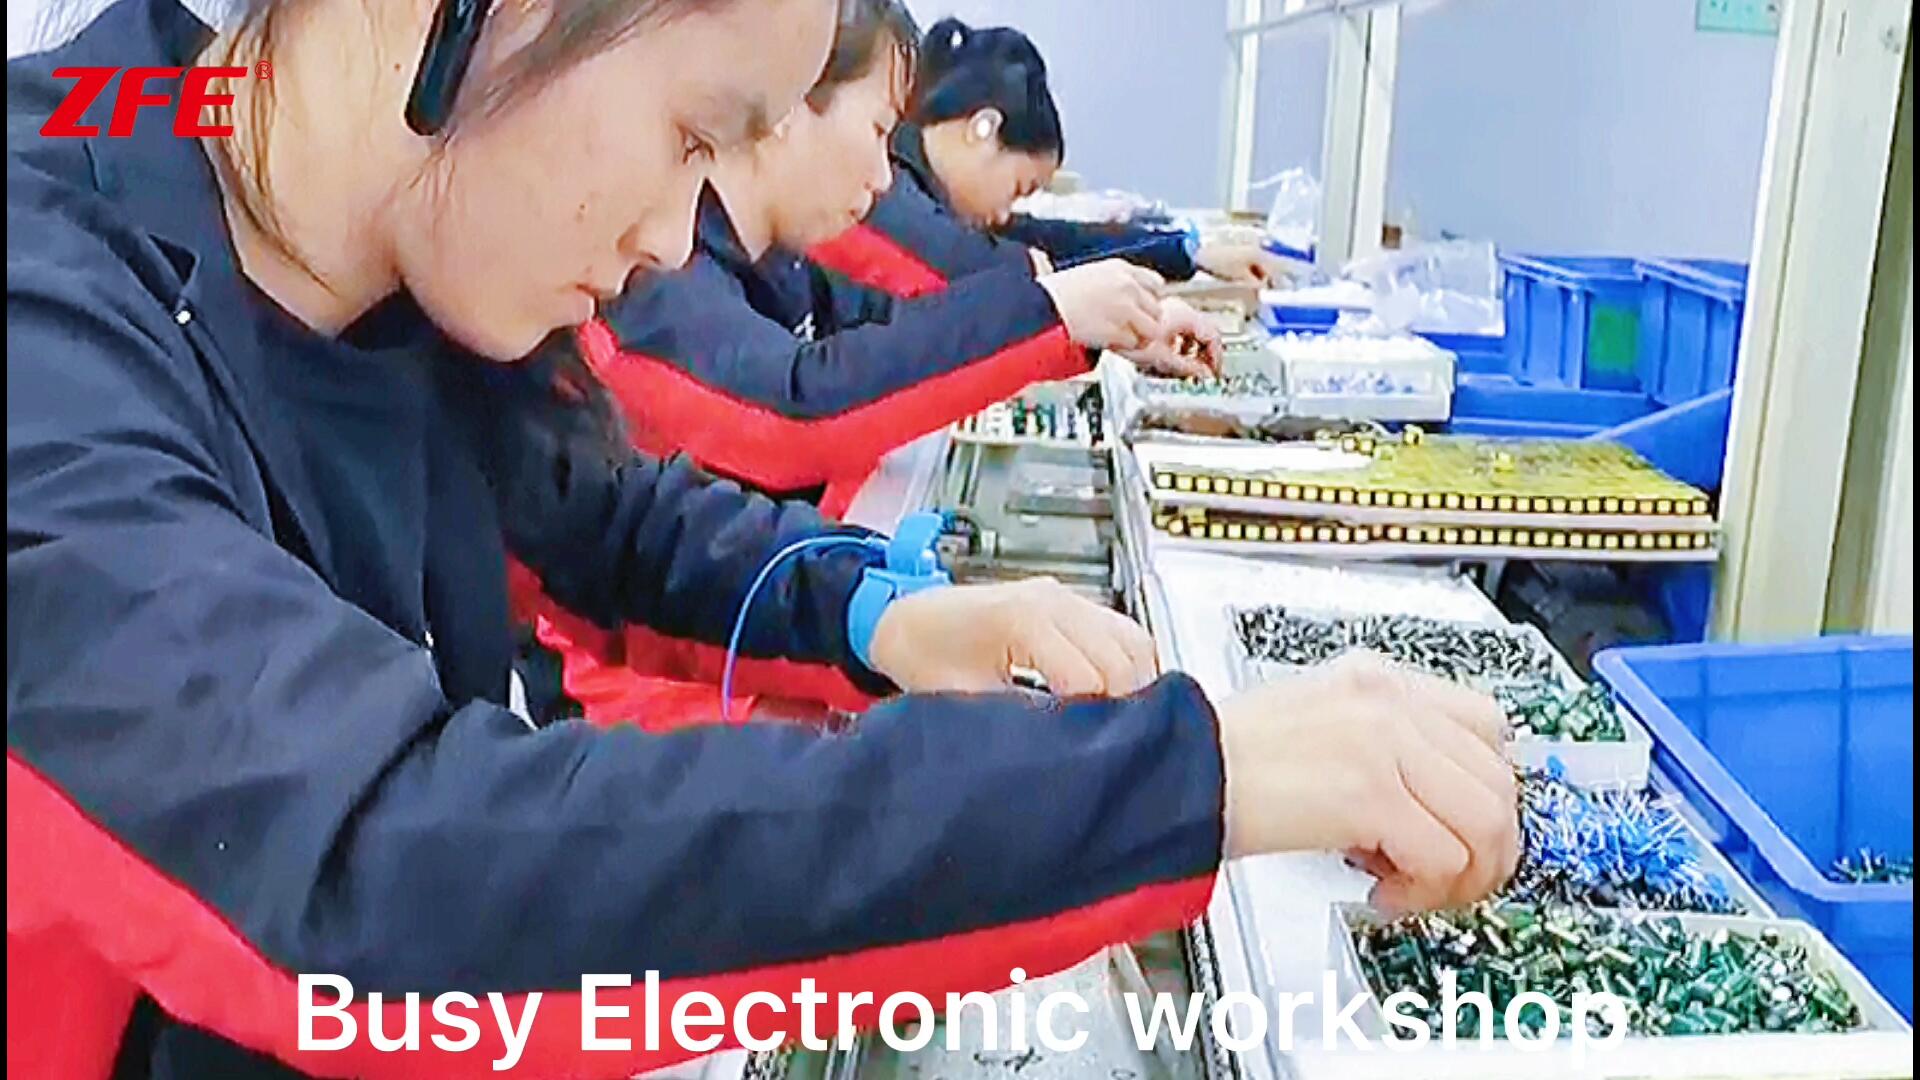 Busy Electronic workshop